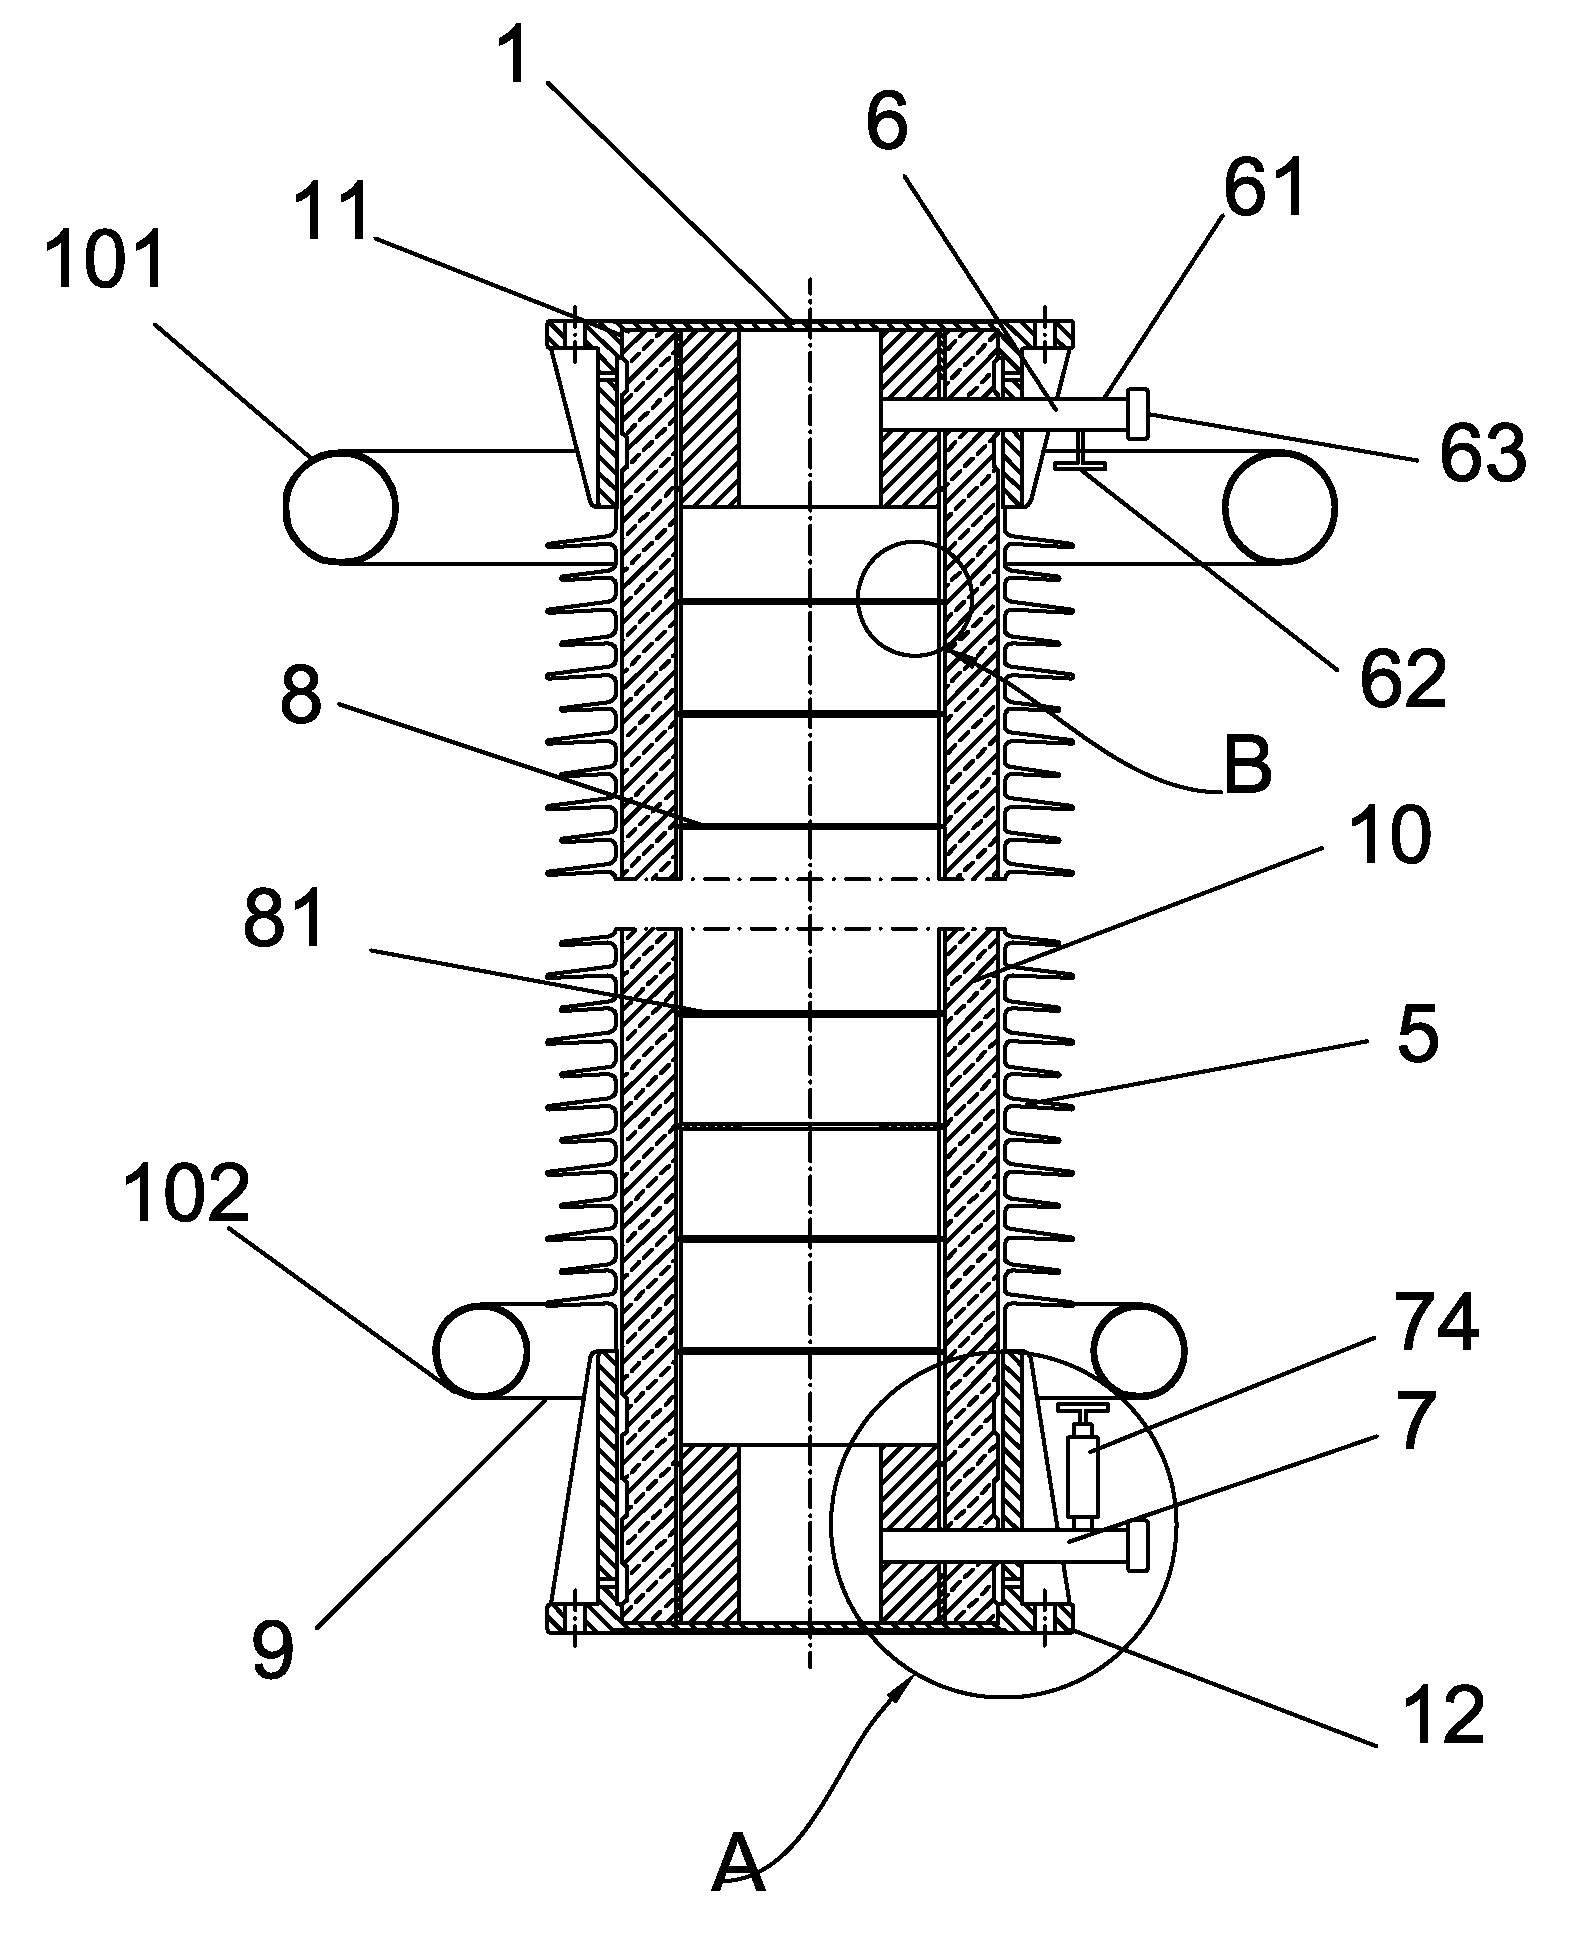 Sectional extra-high-voltage composite post insulator with inner umbrella structure